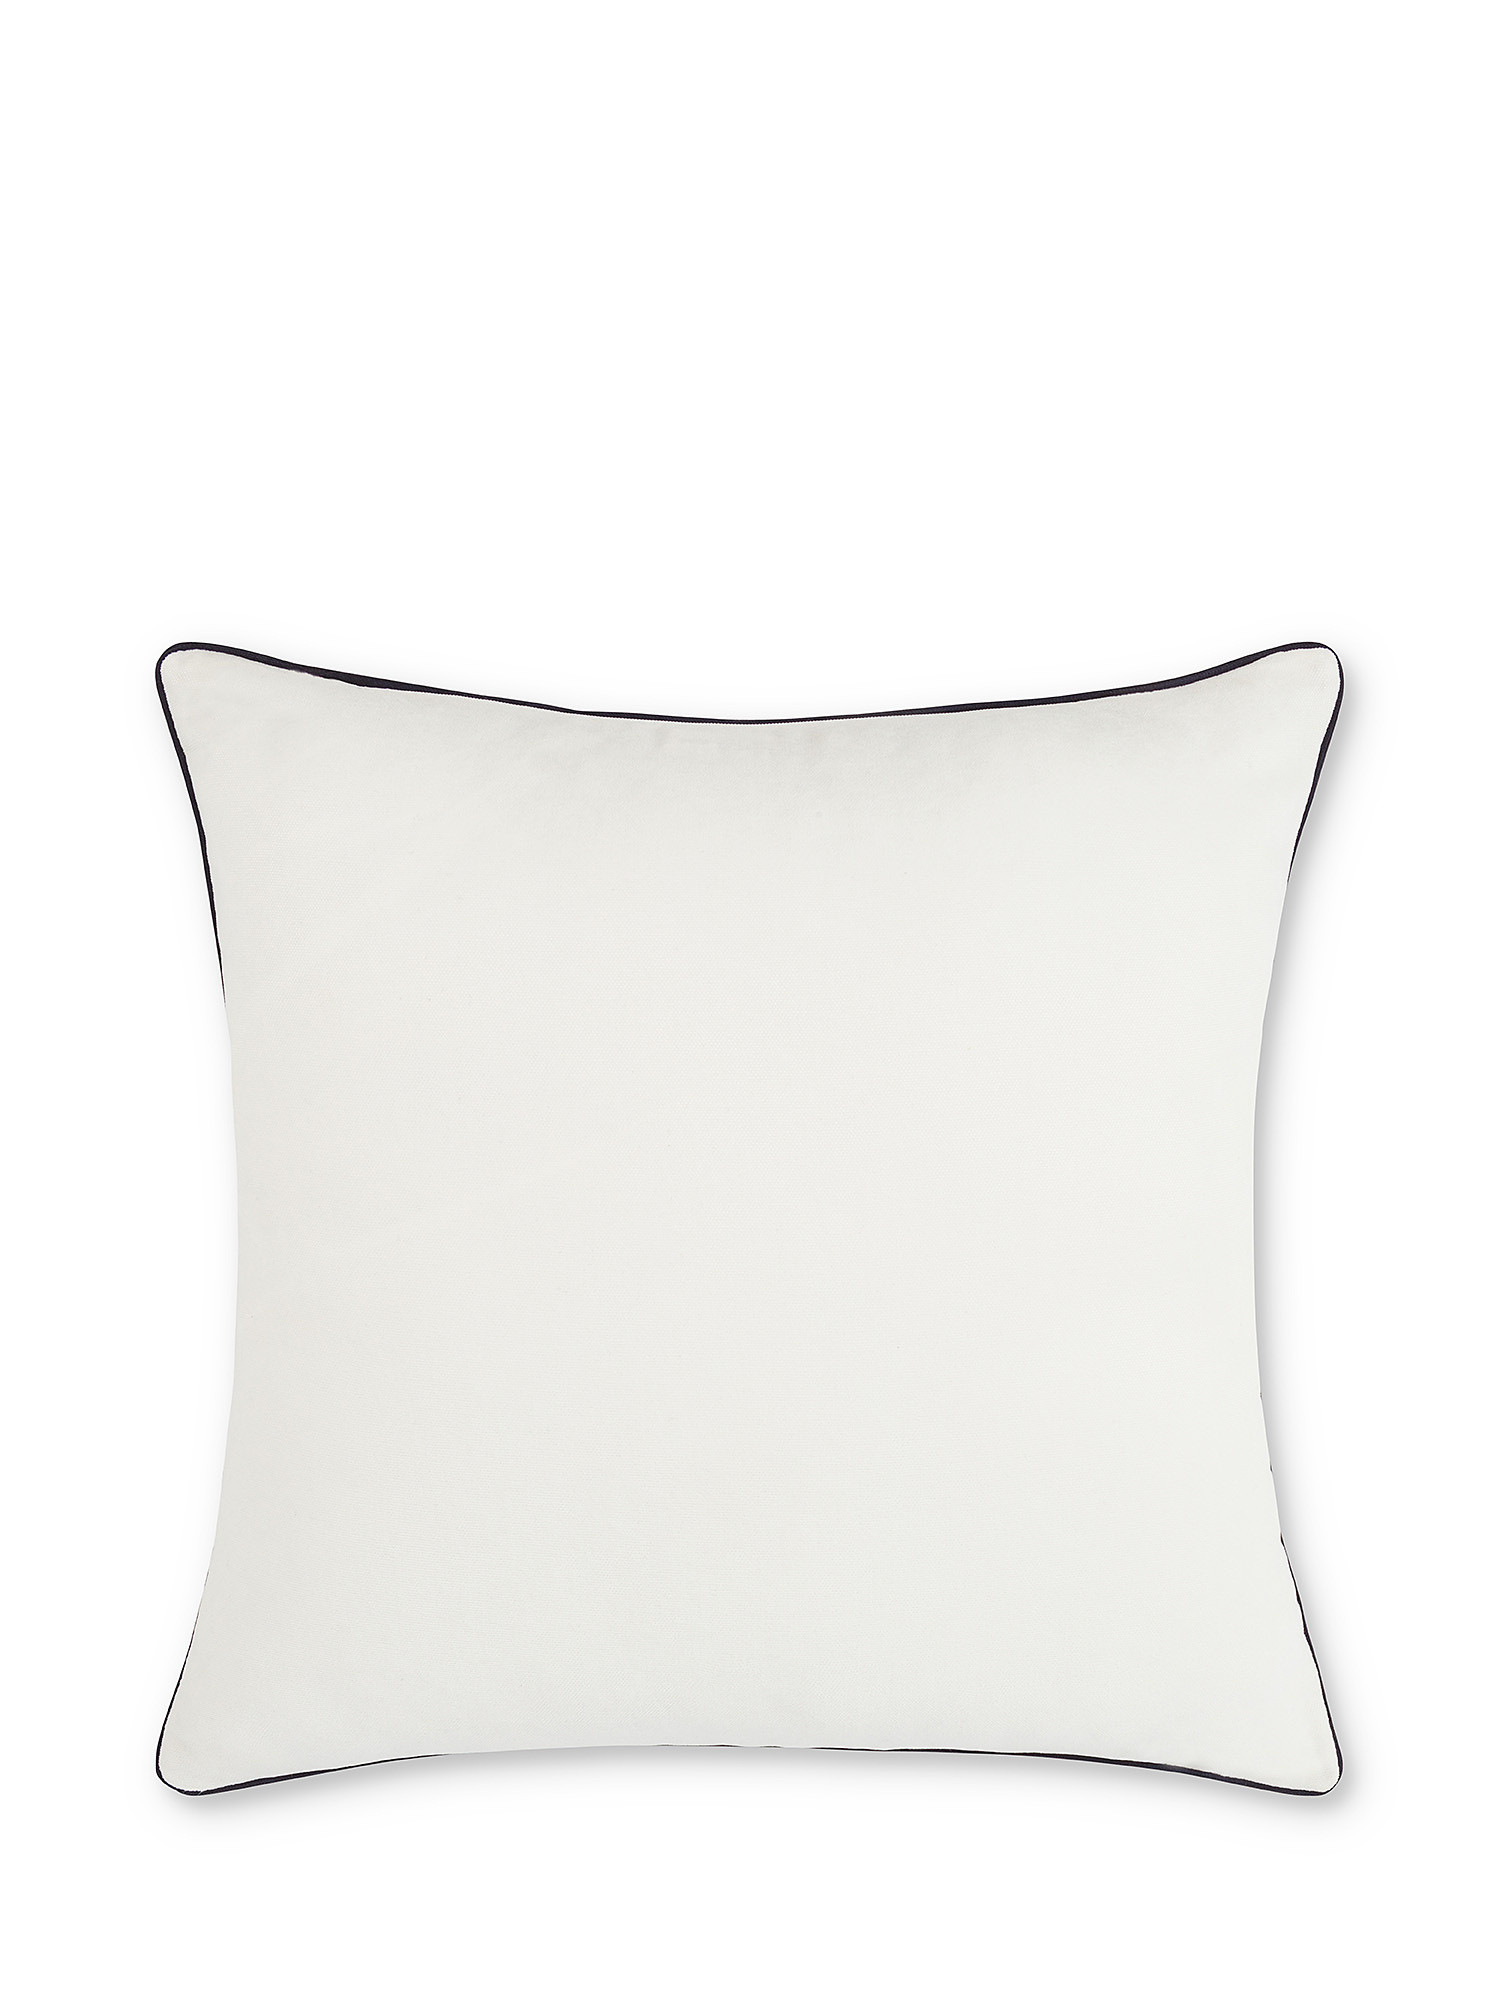 Solid color fabric cushion 45x45cm, White, large image number 1